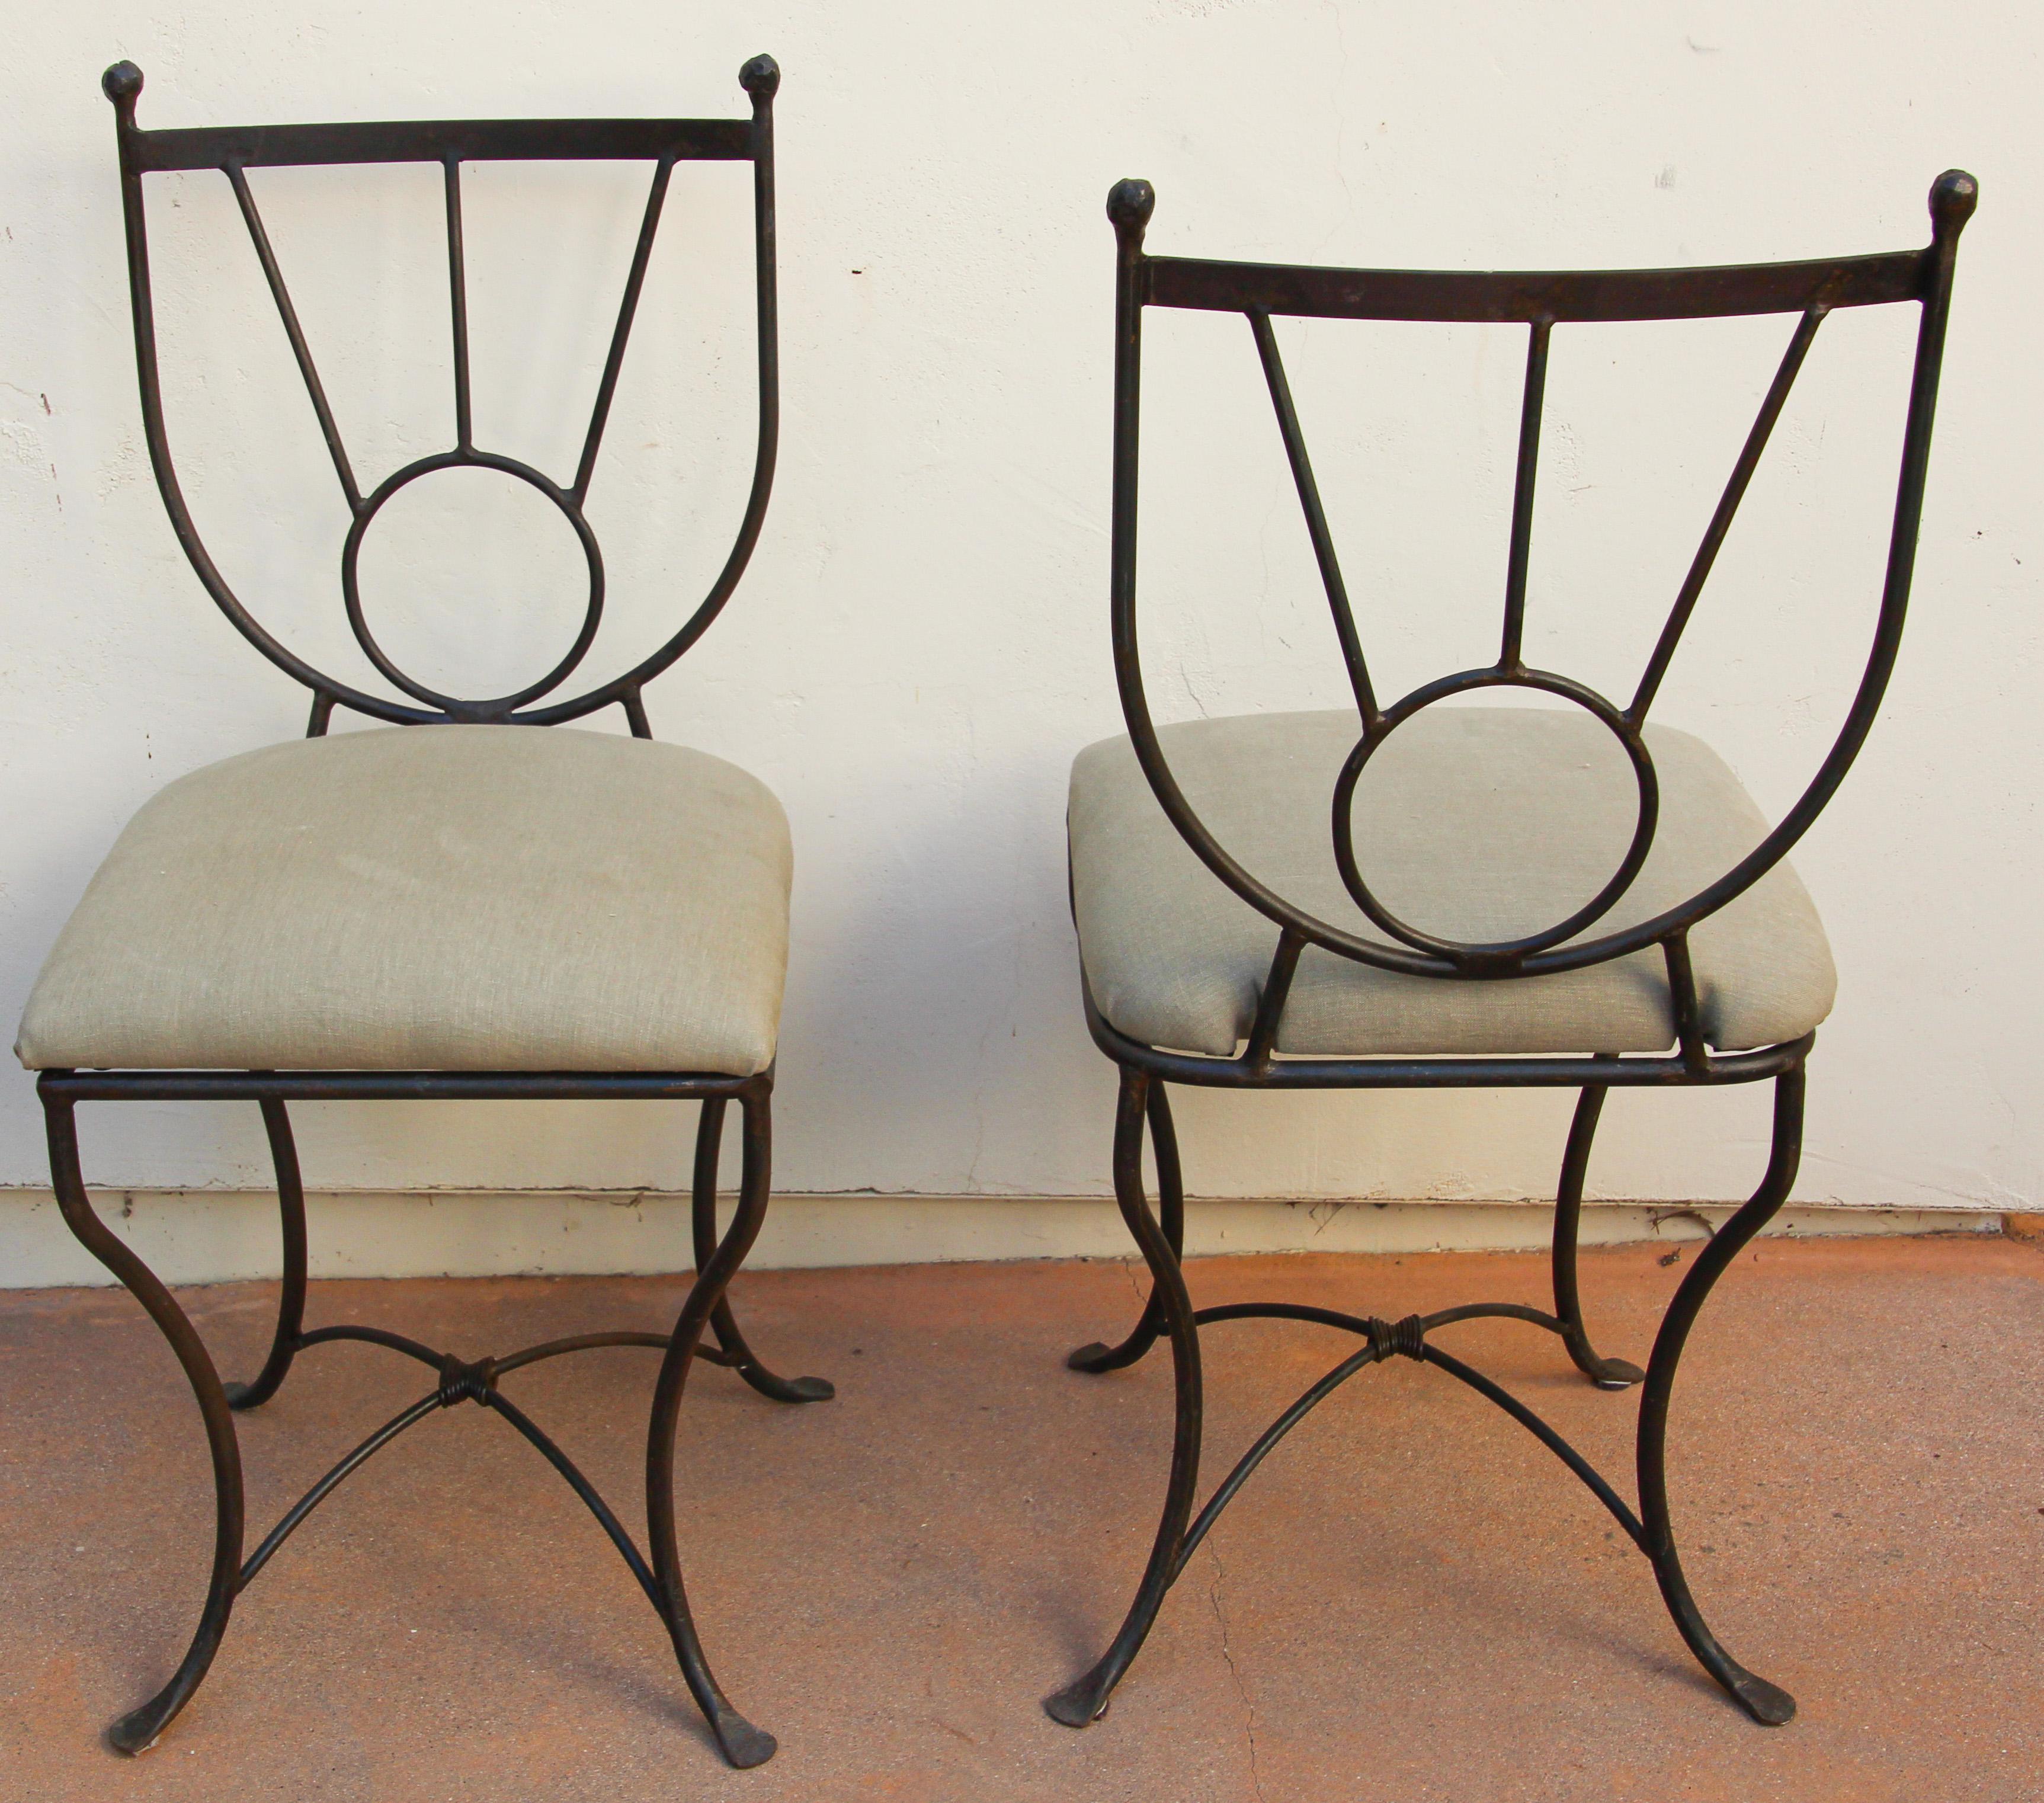 Metal Outdoor Wrought Iron Chairs Set of Four in Mario Papperzini Style